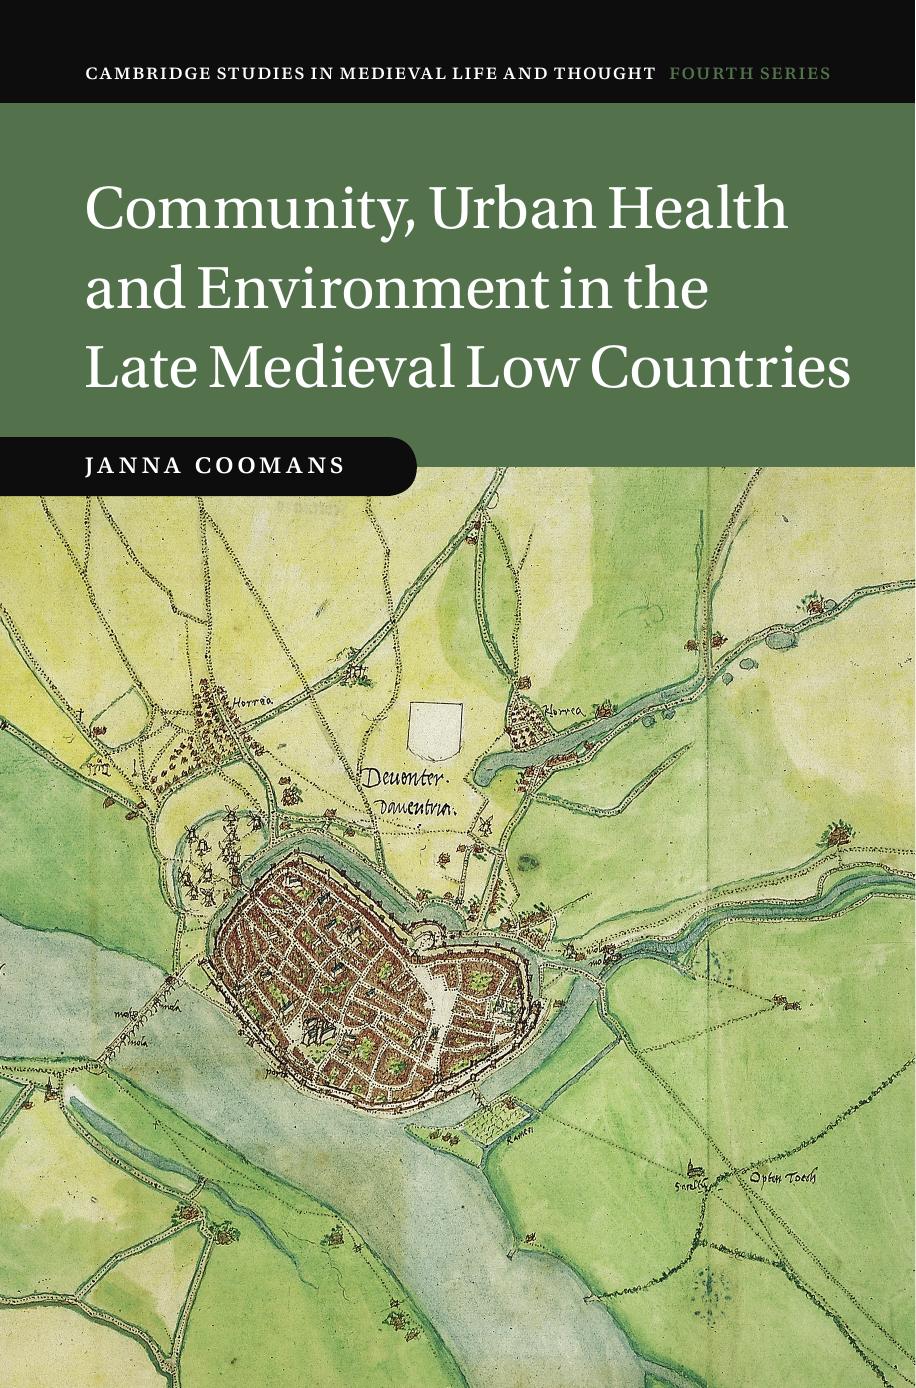 COMMUNITY, URBAN HEALTH AND ENVIRONMENT IN THE LATE MEDIEVAL LOW COUNTRIES